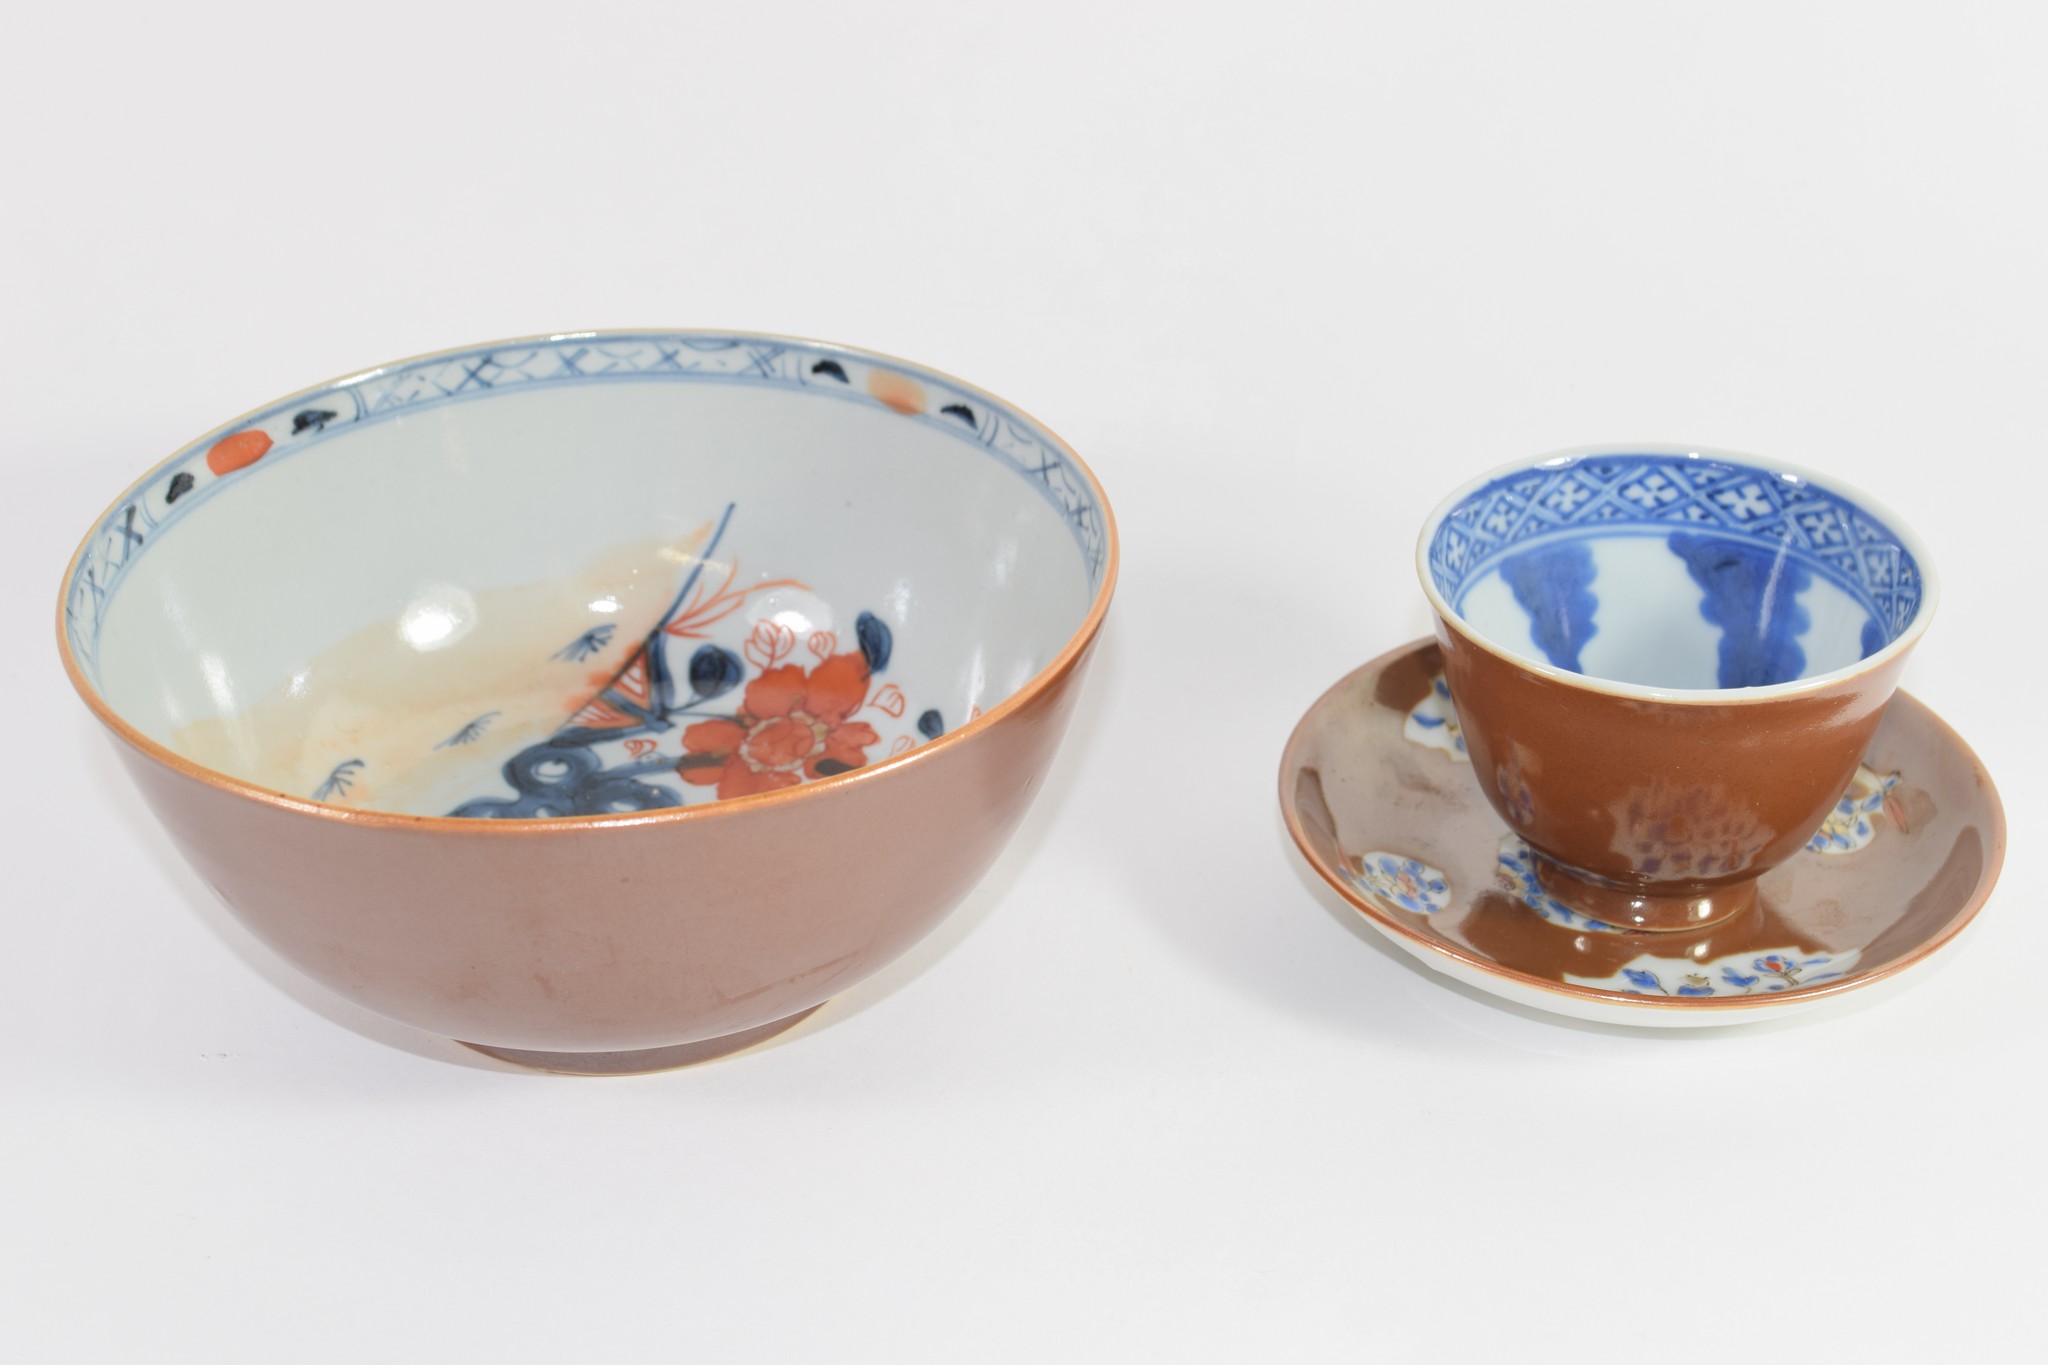 Batavia style Chinese porcelain bowl with Imari decoration to interior and a further tea bowl and